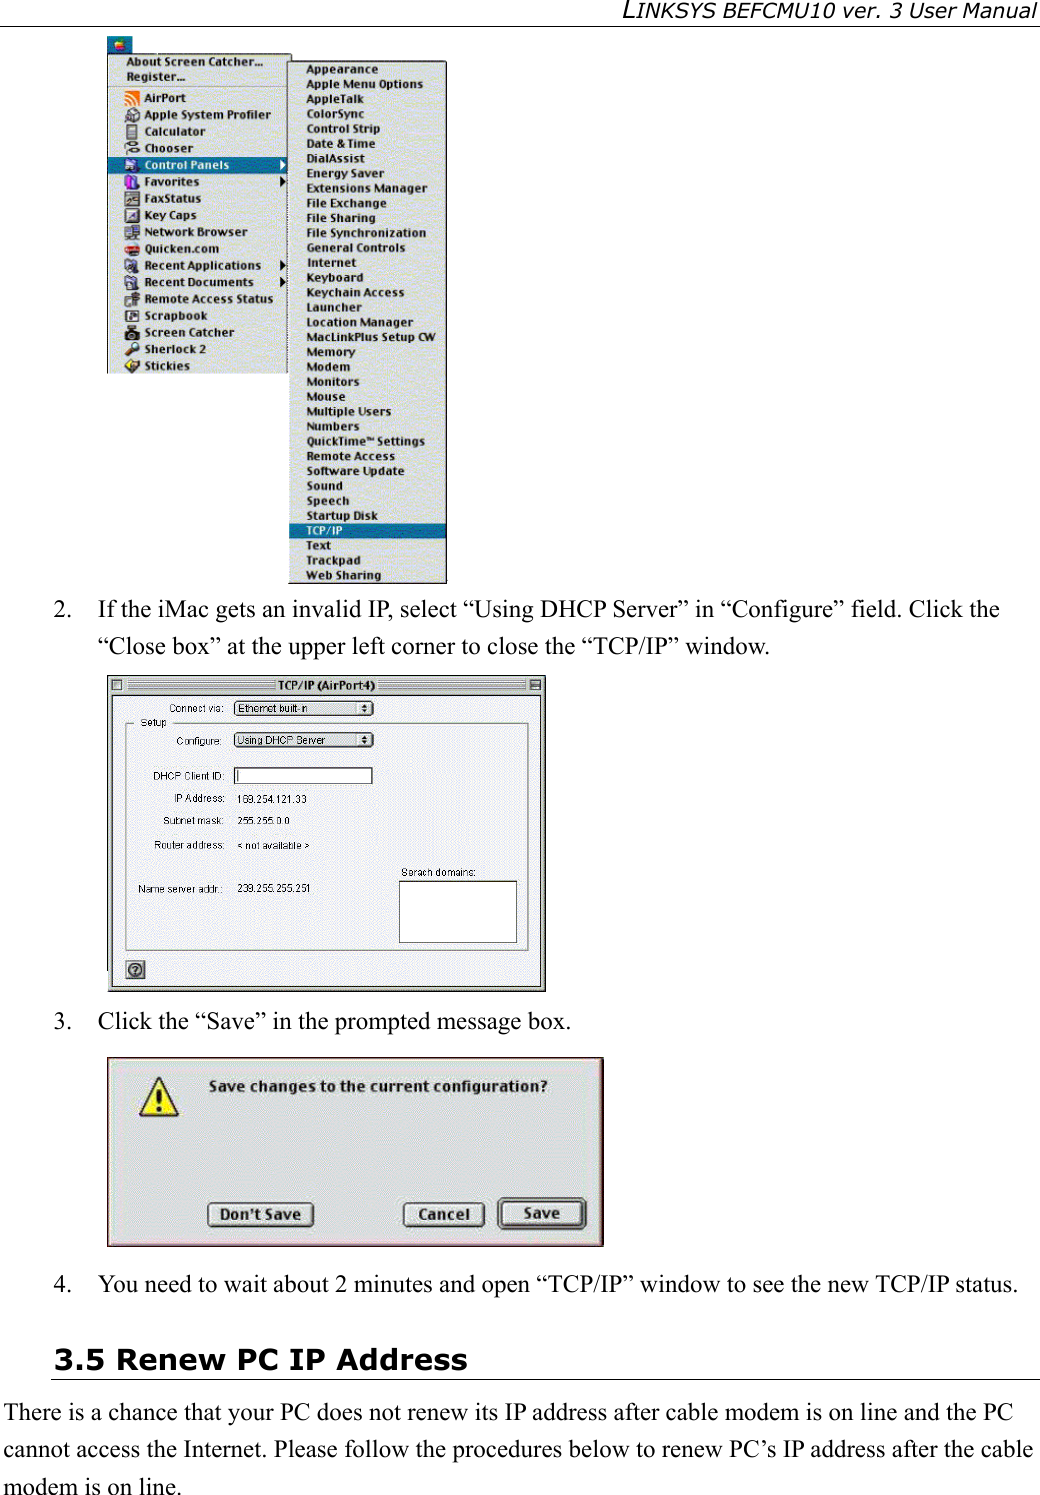 LINKSYS BEFCMU10 ver. 3 User Manual    2.  If the iMac gets an invalid IP, select “Using DHCP Server” in “Configure” field. Click the “Close box” at the upper left corner to close the “TCP/IP” window.  3.  Click the “Save” in the prompted message box.    4.  You need to wait about 2 minutes and open “TCP/IP” window to see the new TCP/IP status. 3.5 Renew PC IP Address There is a chance that your PC does not renew its IP address after cable modem is on line and the PC cannot access the Internet. Please follow the procedures below to renew PC’s IP address after the cable modem is on line. 